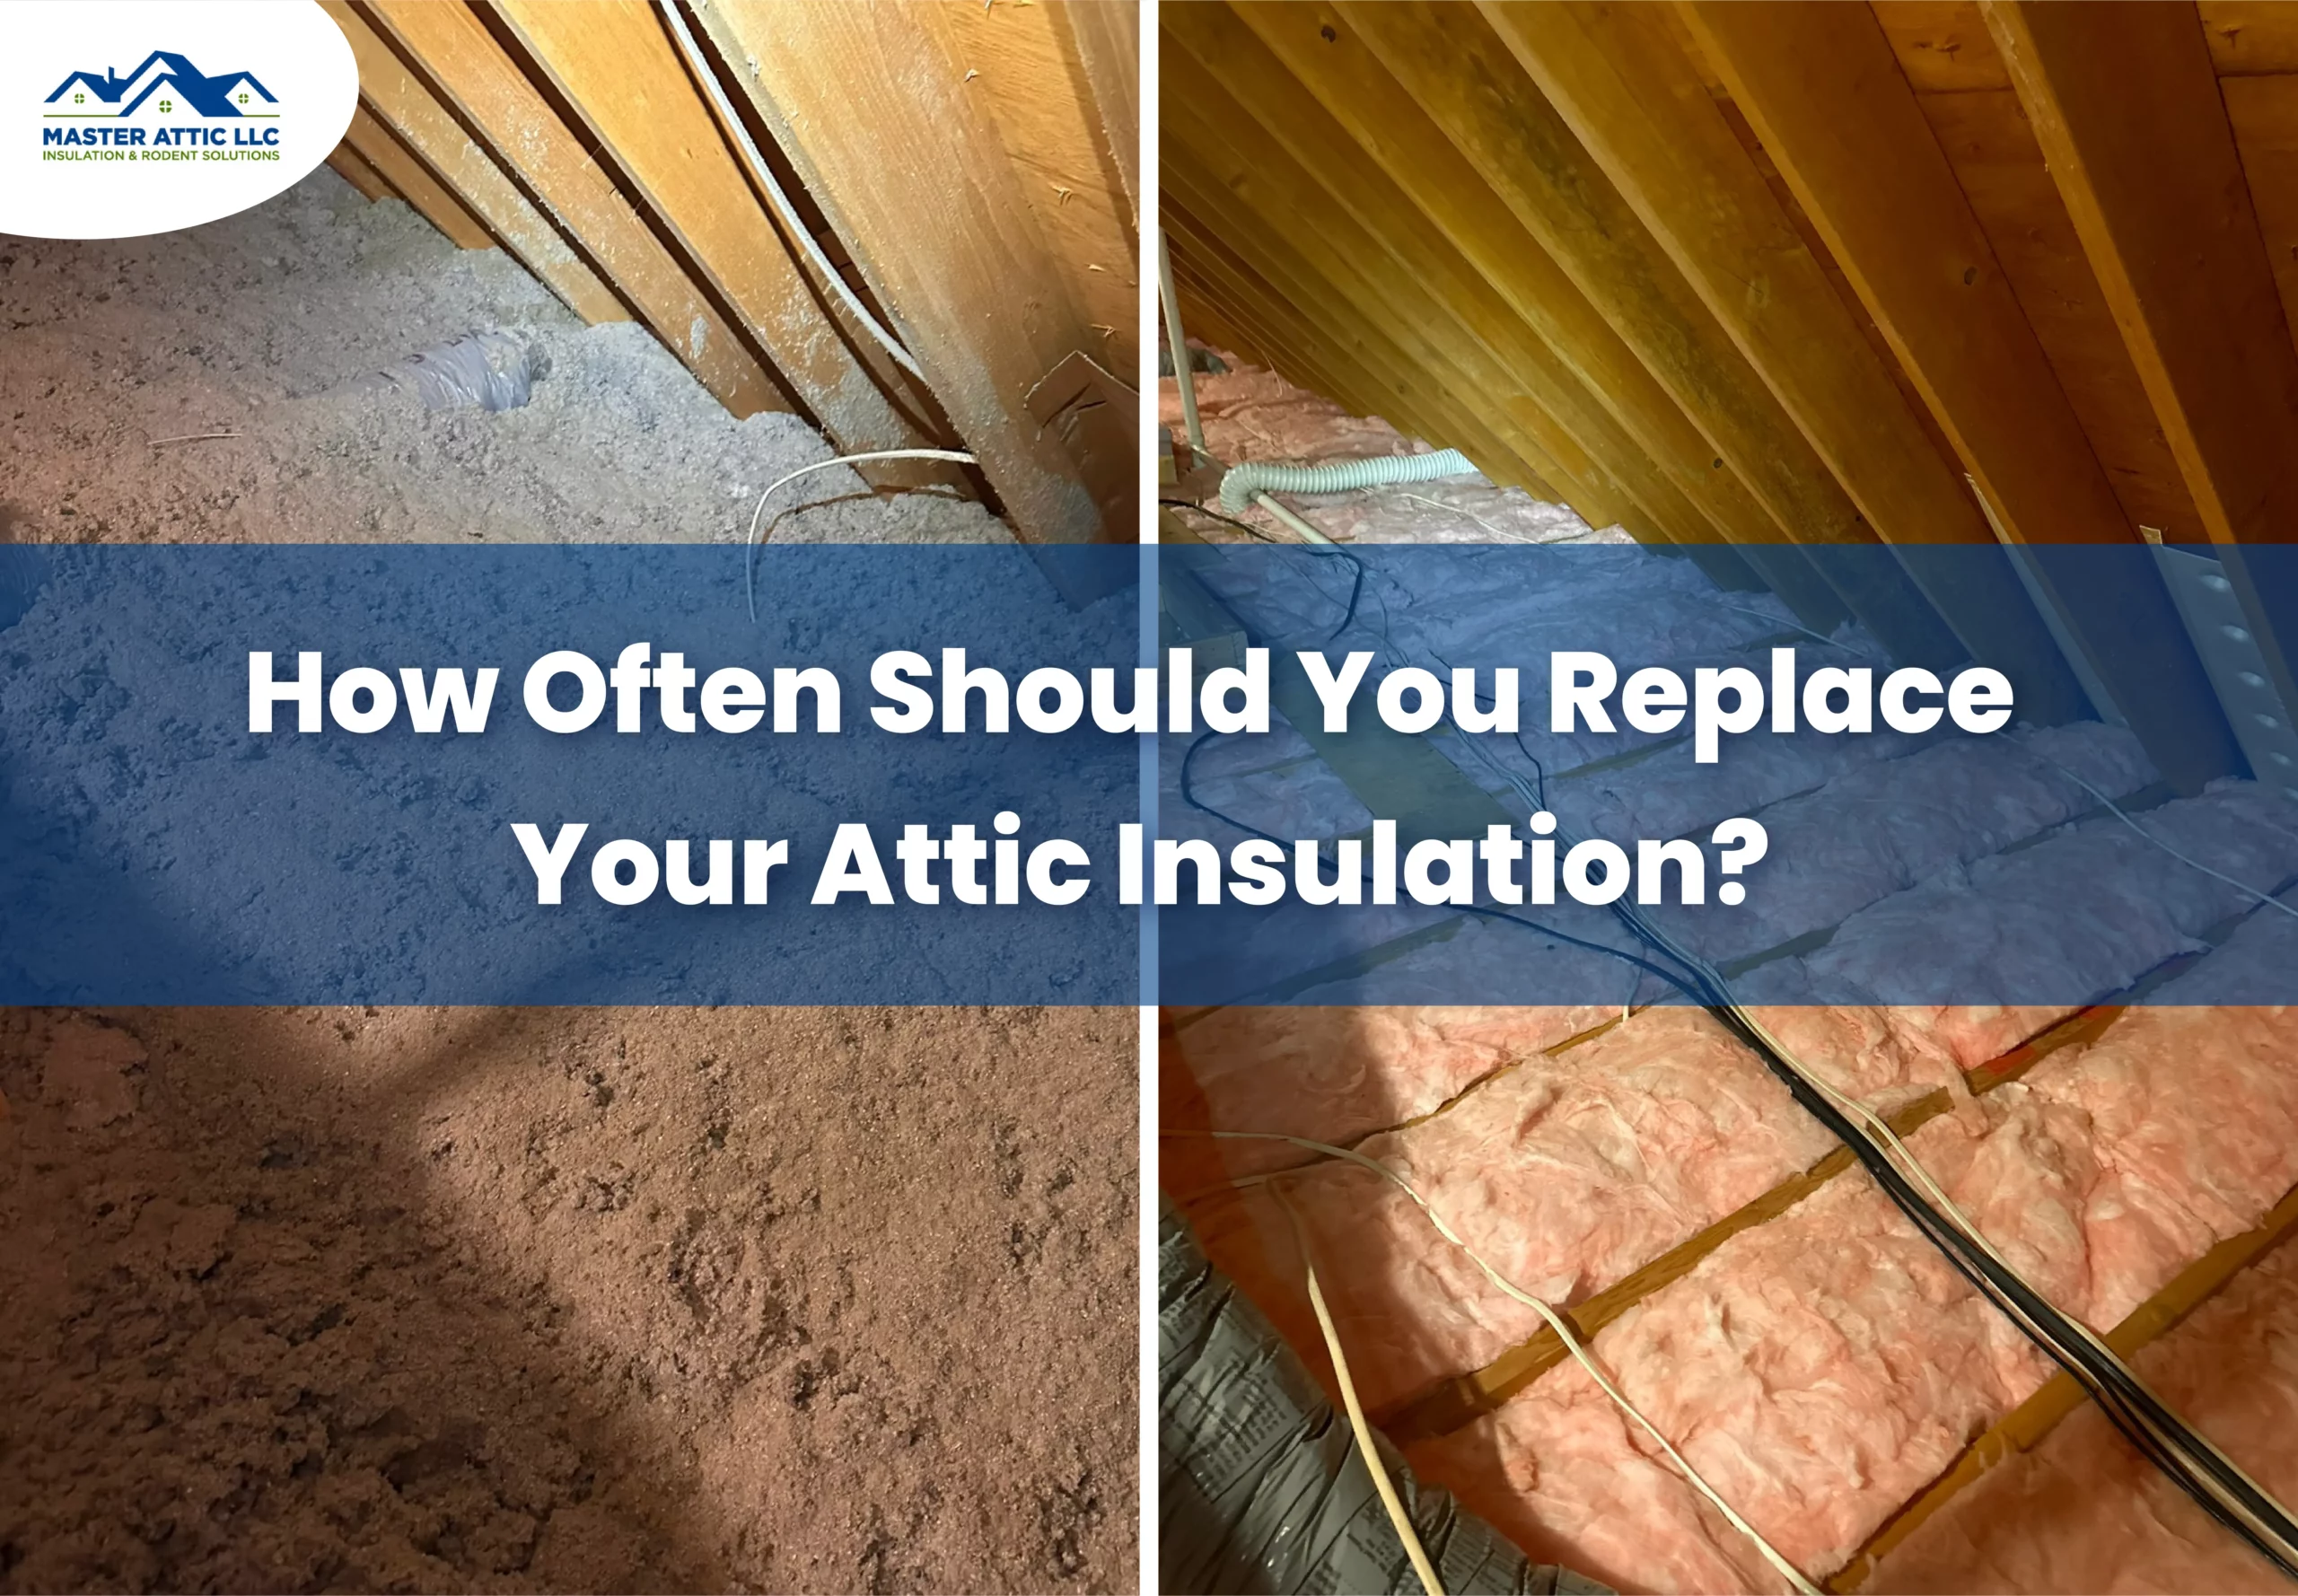 How Often Should You Replace Your Attic Insulation